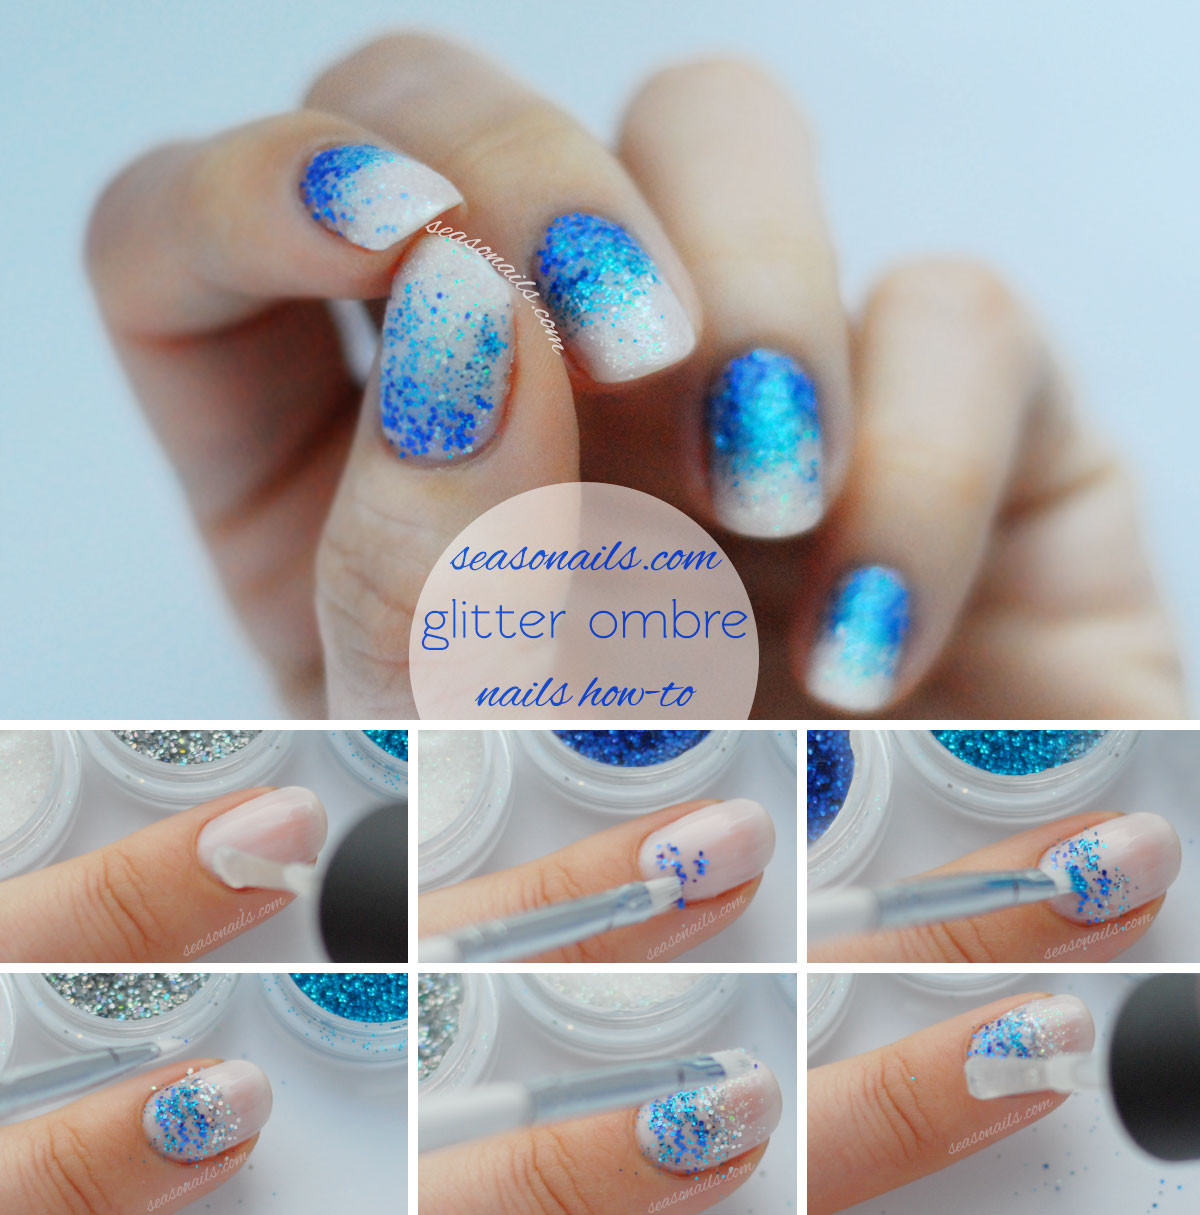 Glitter Ombre Nails Tutorial
 Party Nails Full Glitter Ombre Nail Art Seasonails